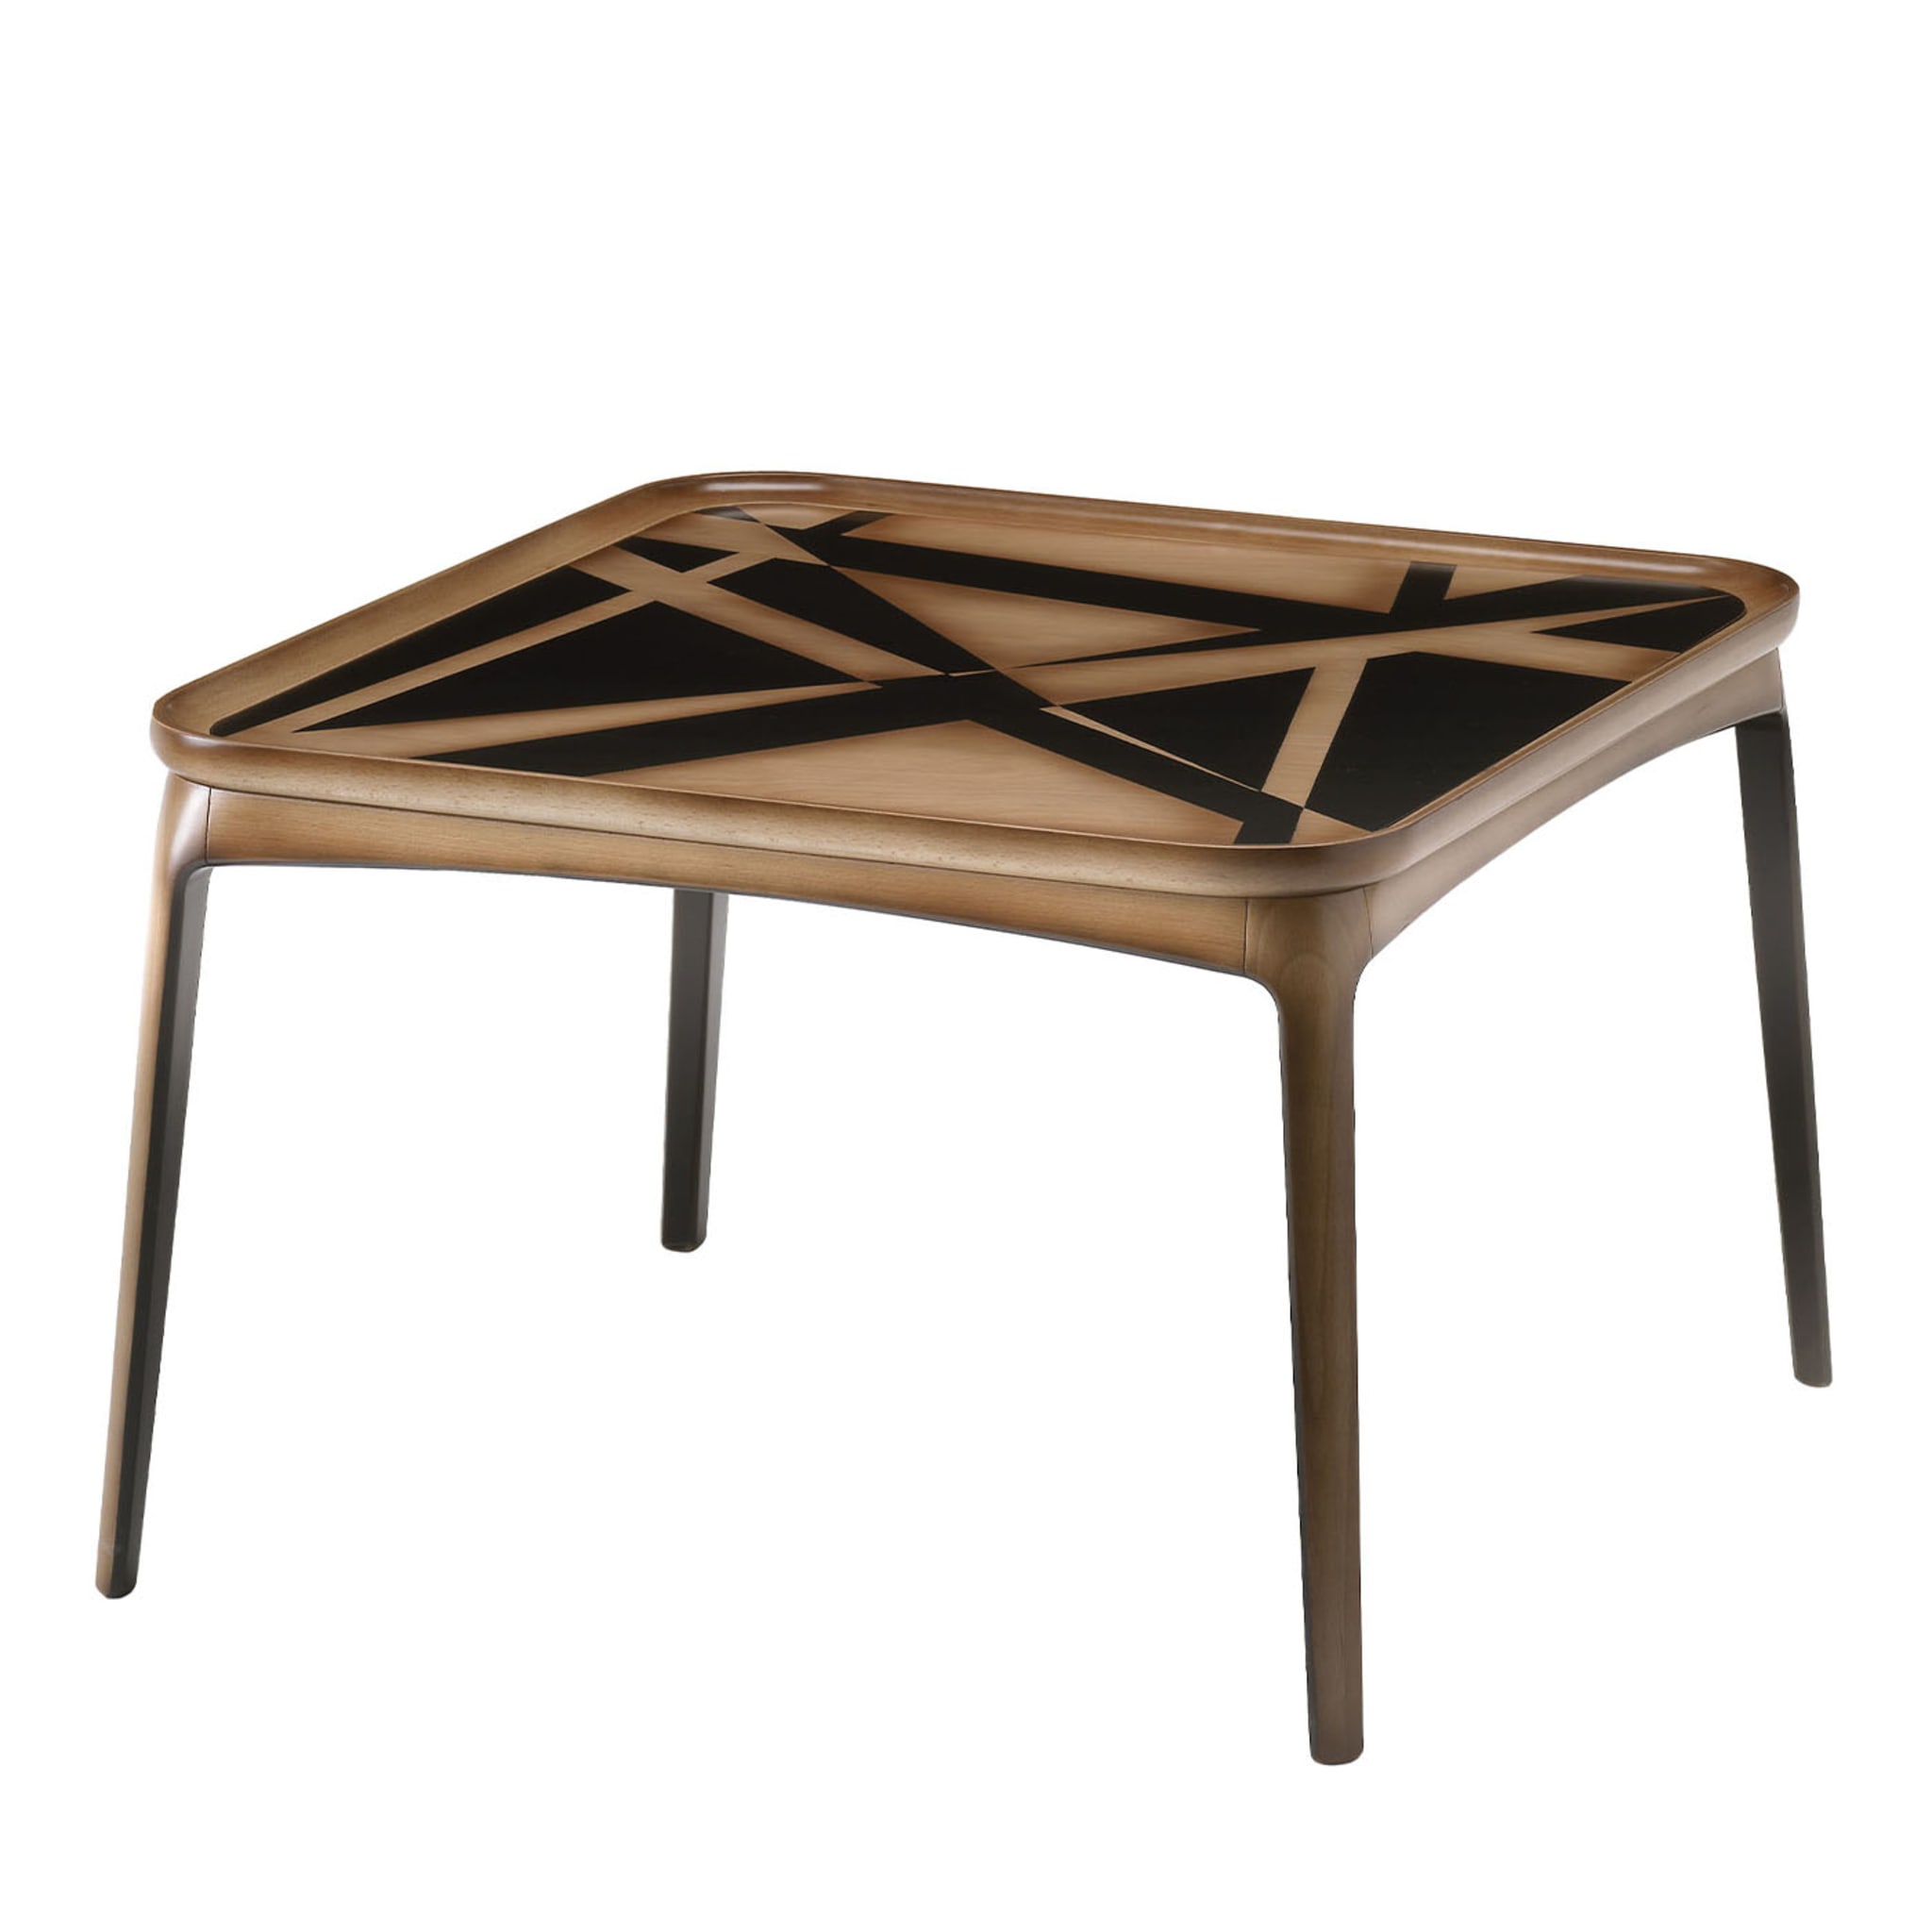 Tallin Black-Patterned Coffee Table - Main view